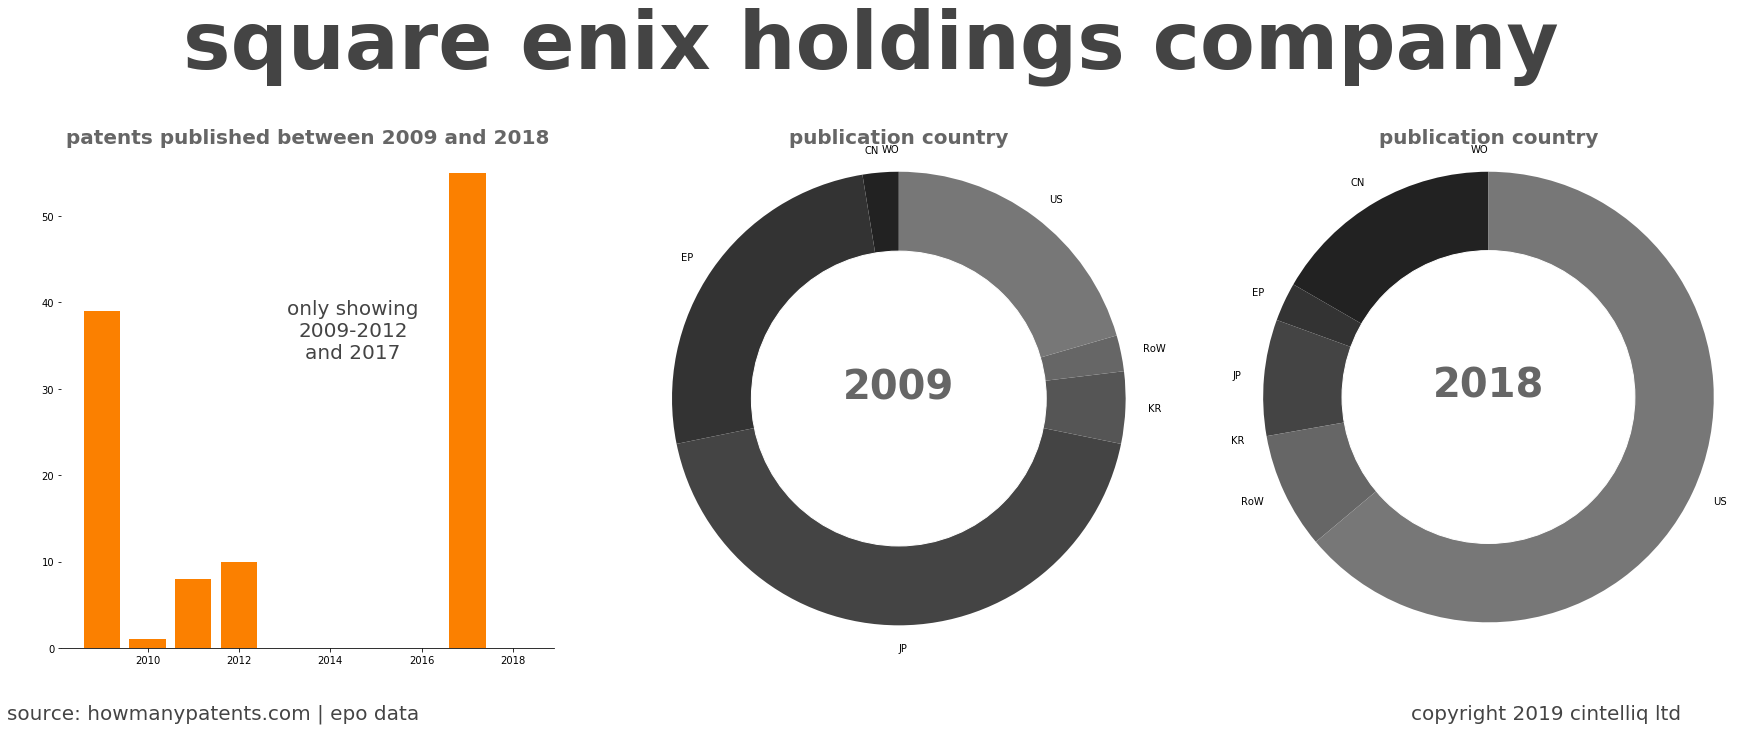 summary of patents for Square Enix Holdings Company